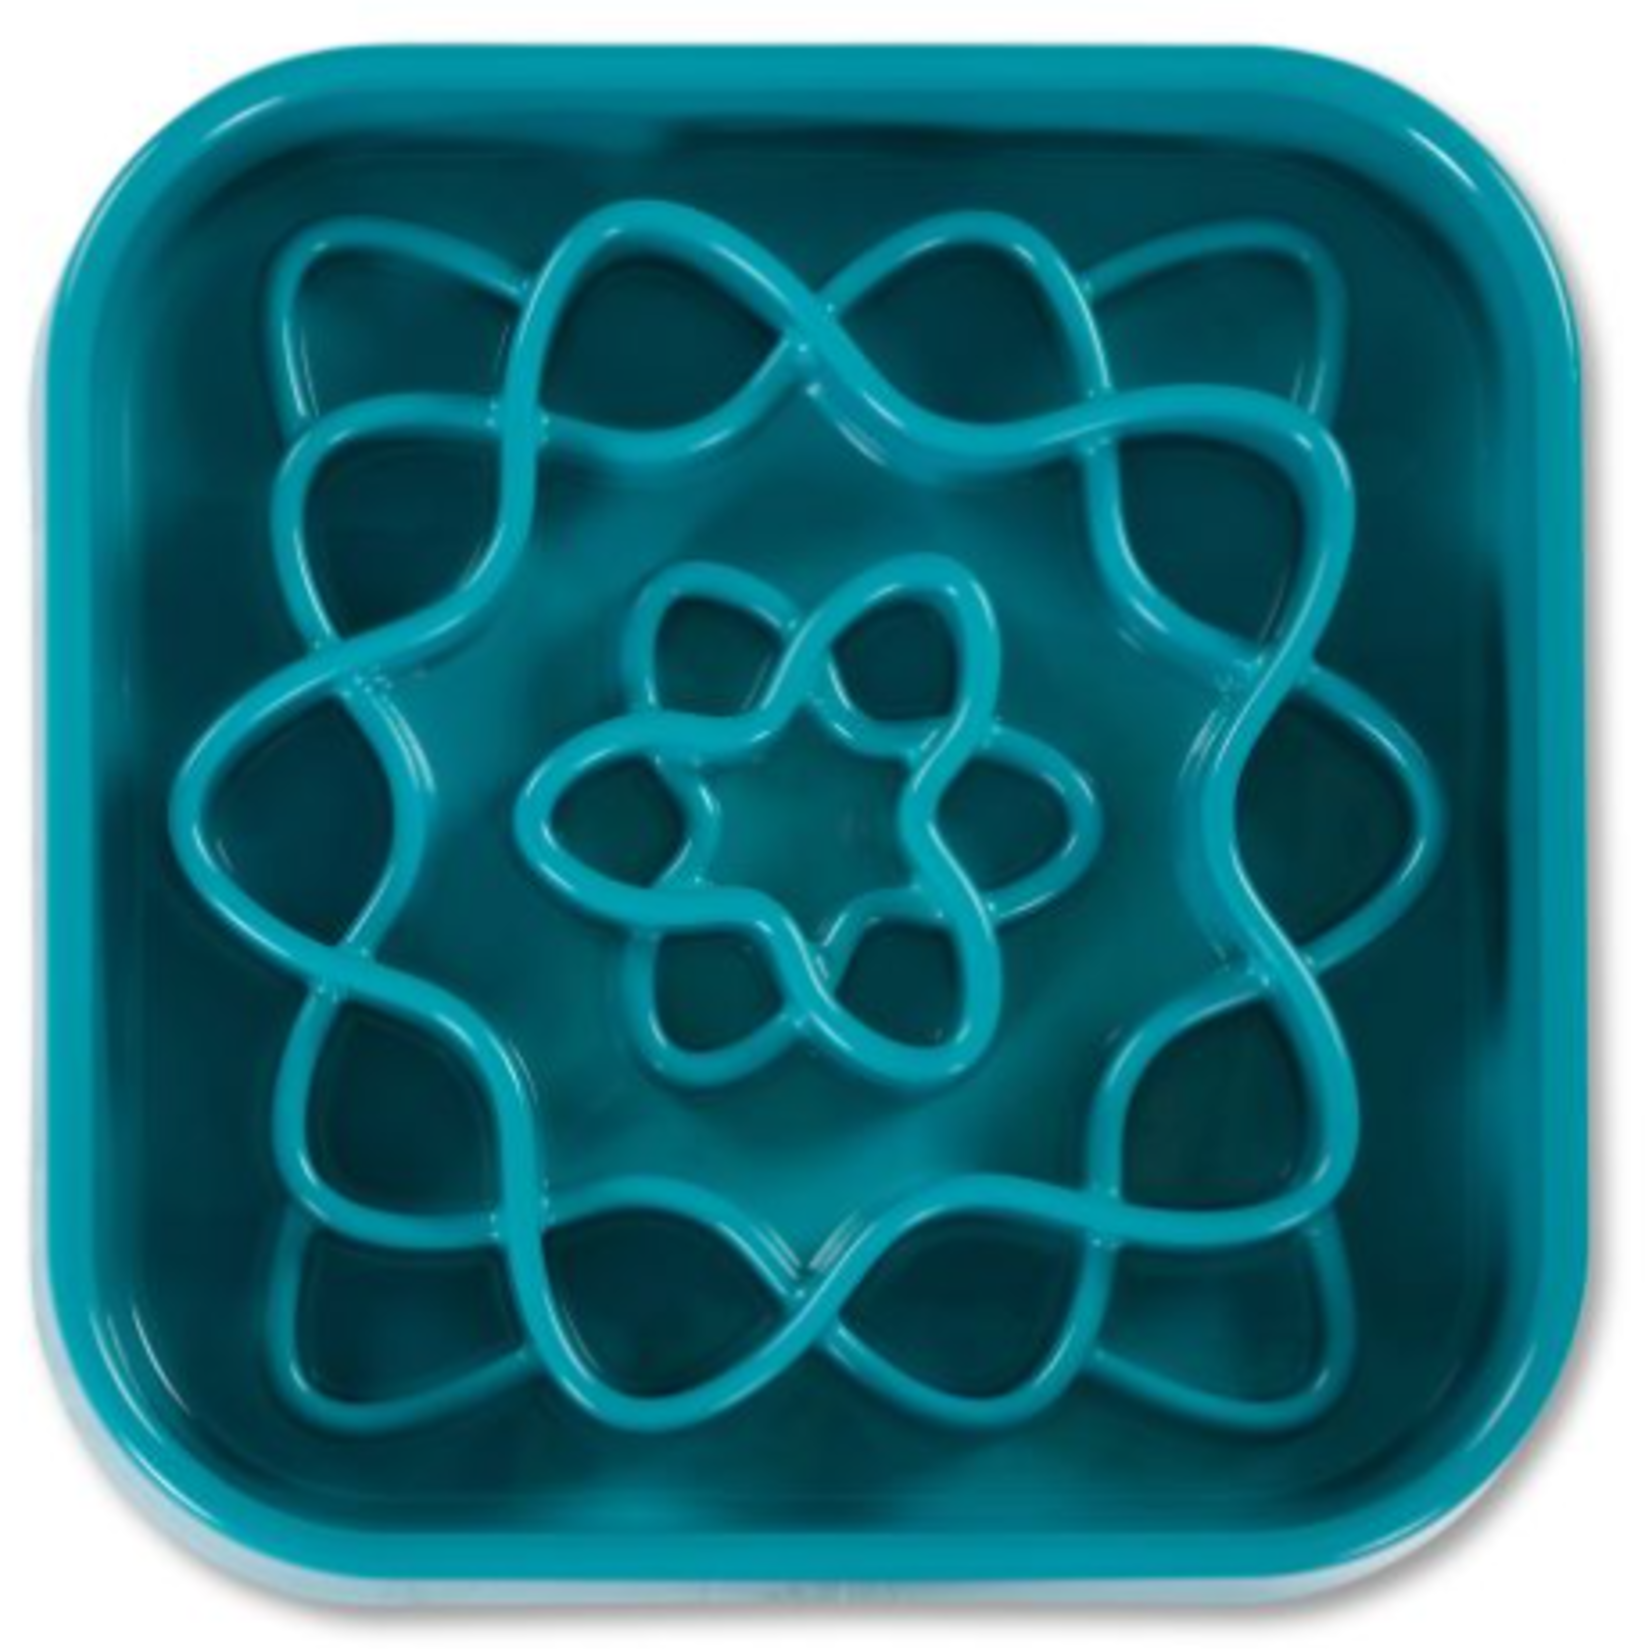 Messy Mutts Square Slow Down Bowl - Blue - 8 cups